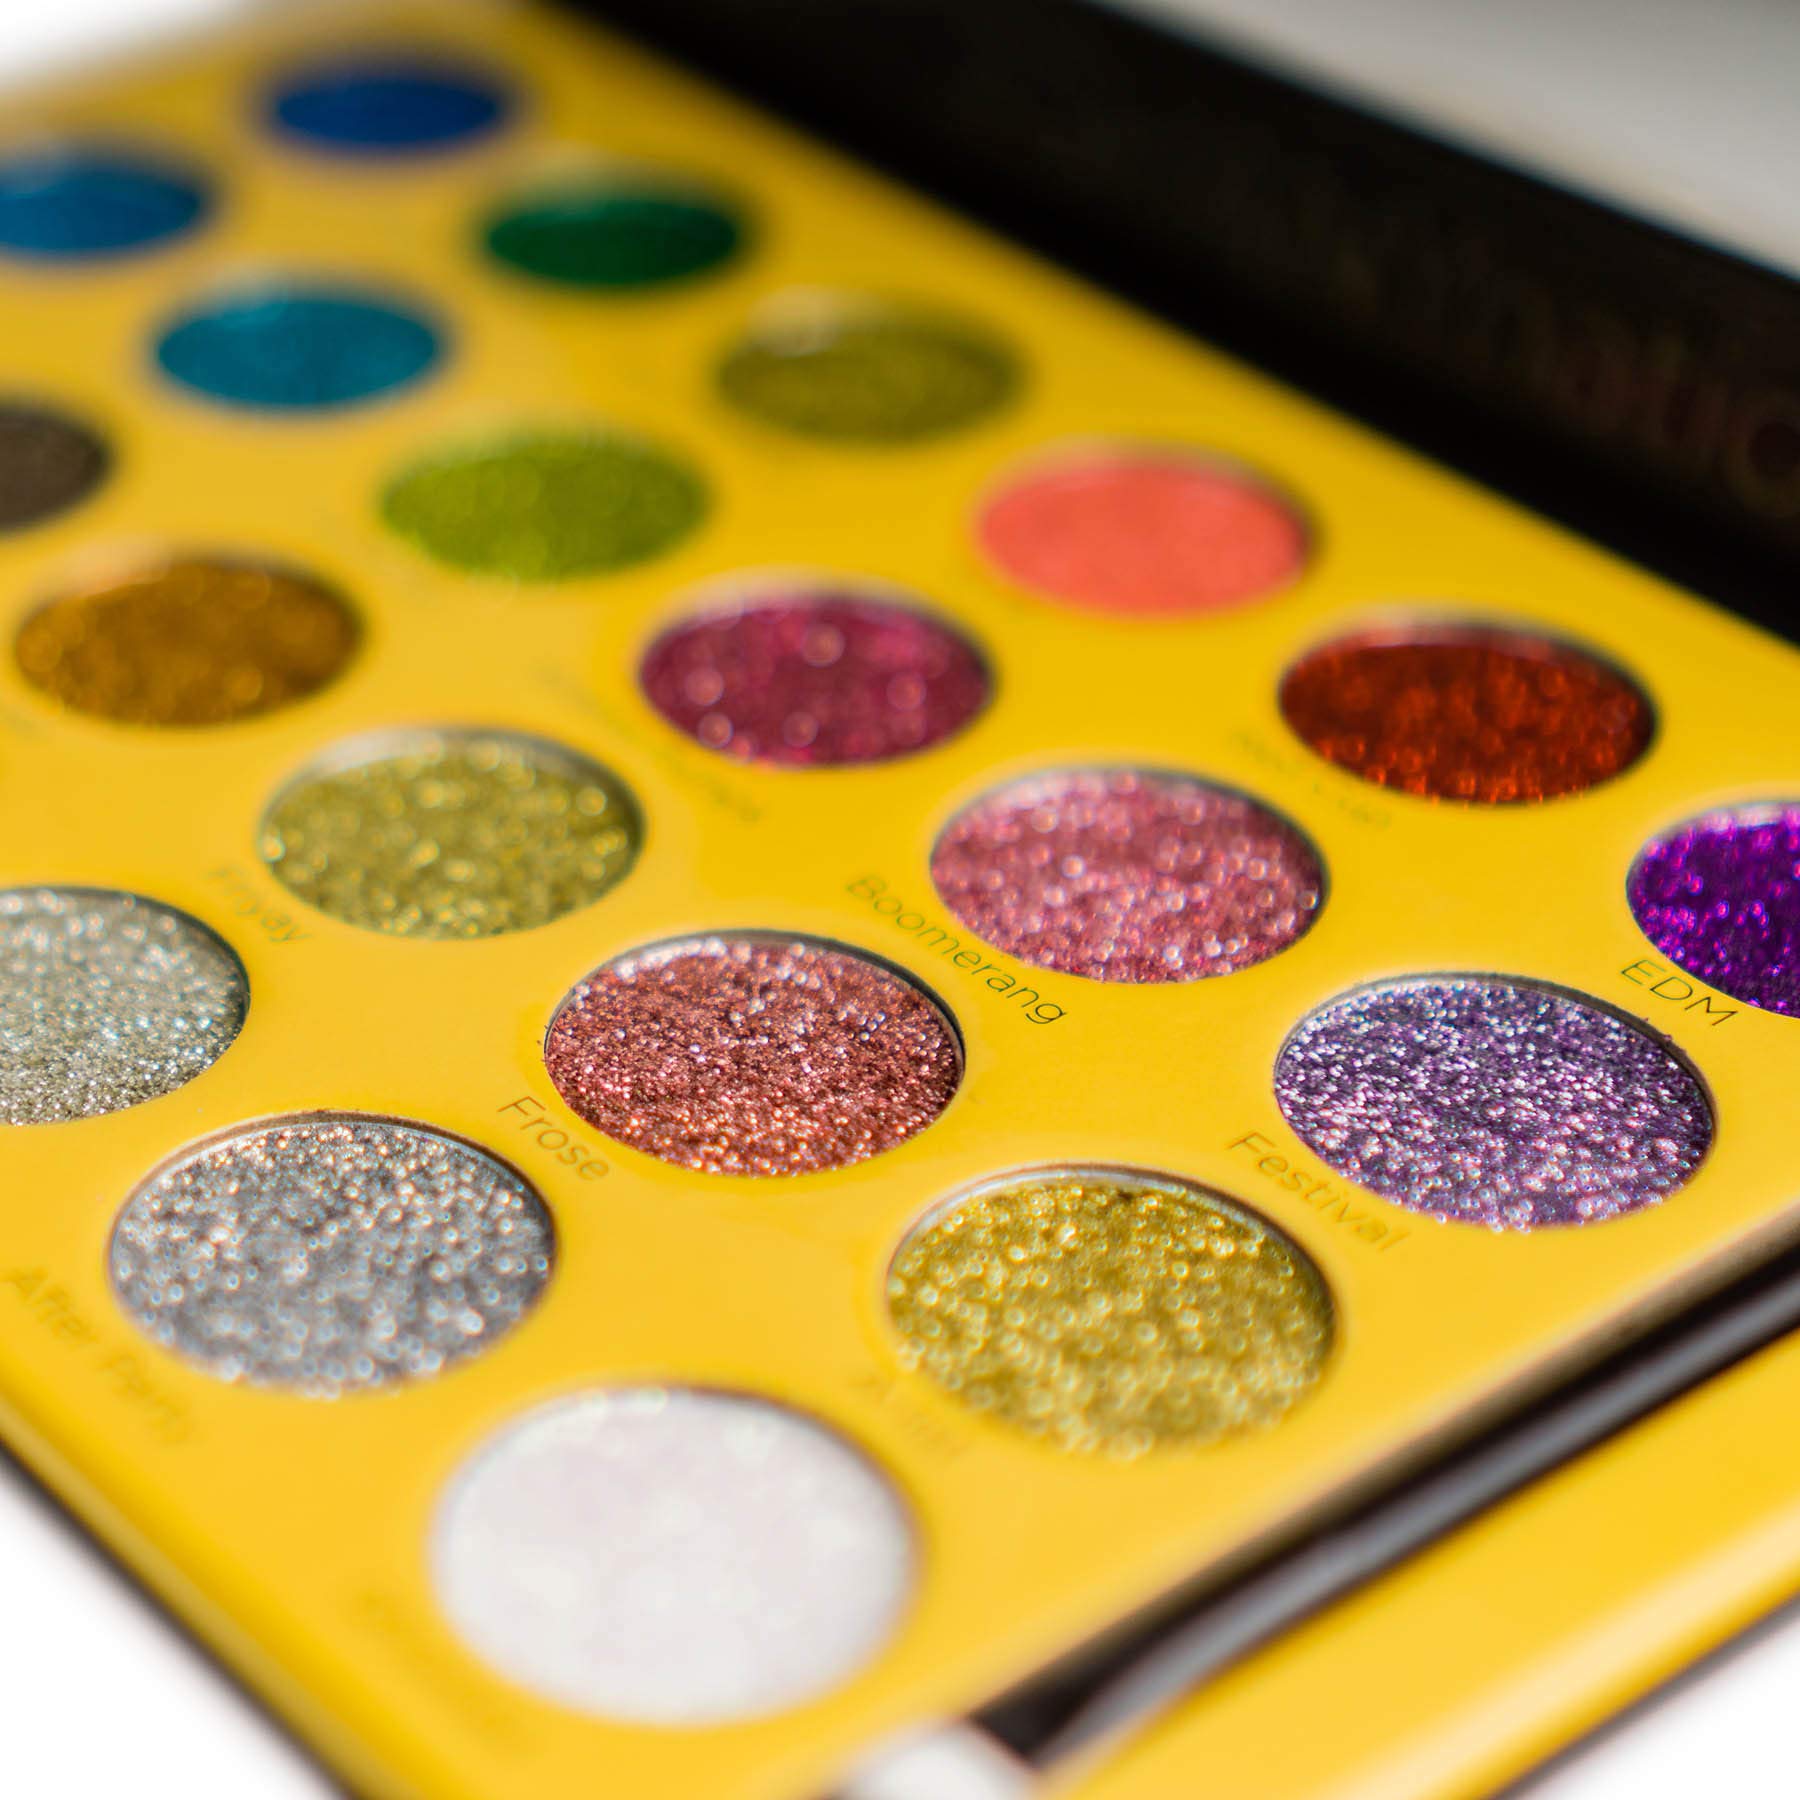 SHANY RSVParty Makeup Glitter Eyeshadow Palette - 24 Long-Lasting Pressed Glitter Pigments for Face and Body - Ultra Pigmented Glitter Makeup set with a Makeup Brush. Full Size Eyeshadow Pan.